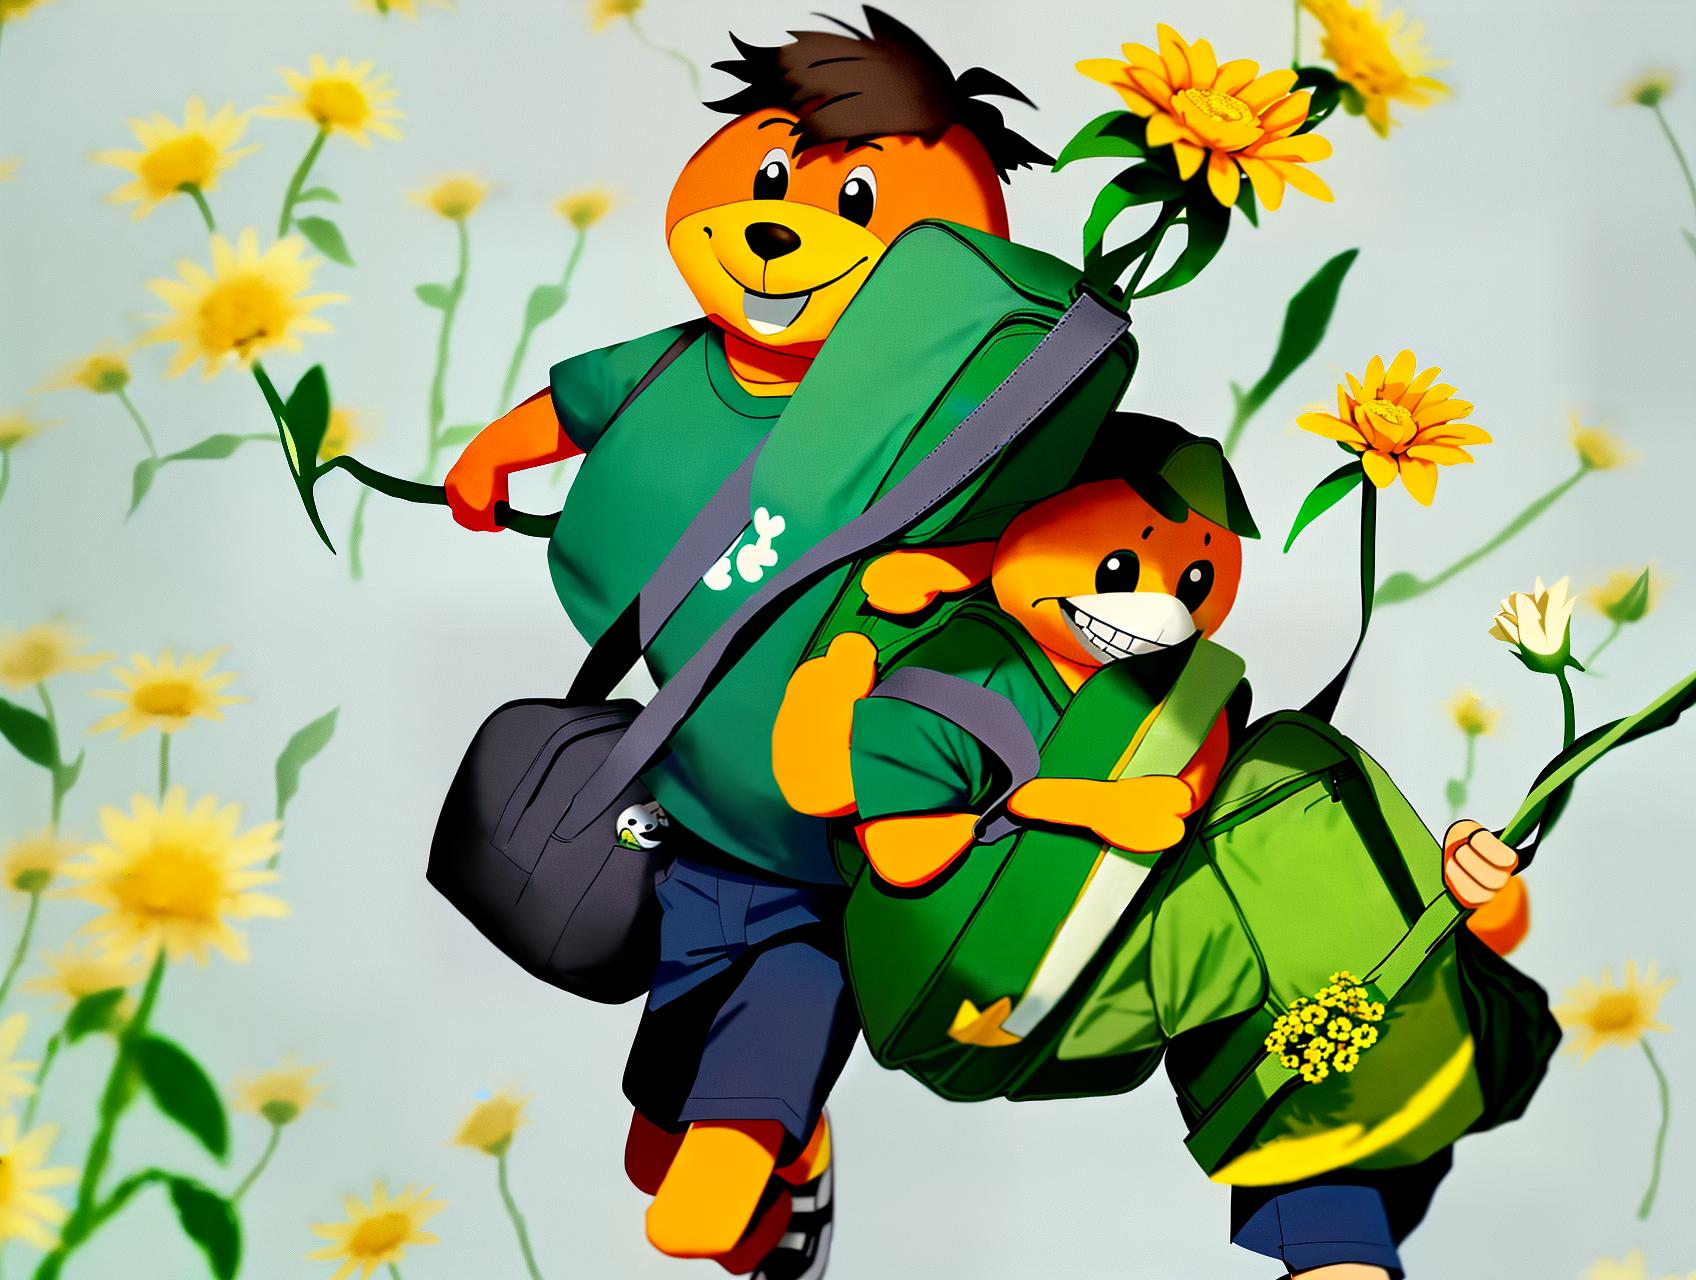  mascot, best quality, mascot, wearing a green T-shirt, carrying a schoolbag, smiling, holding flowers